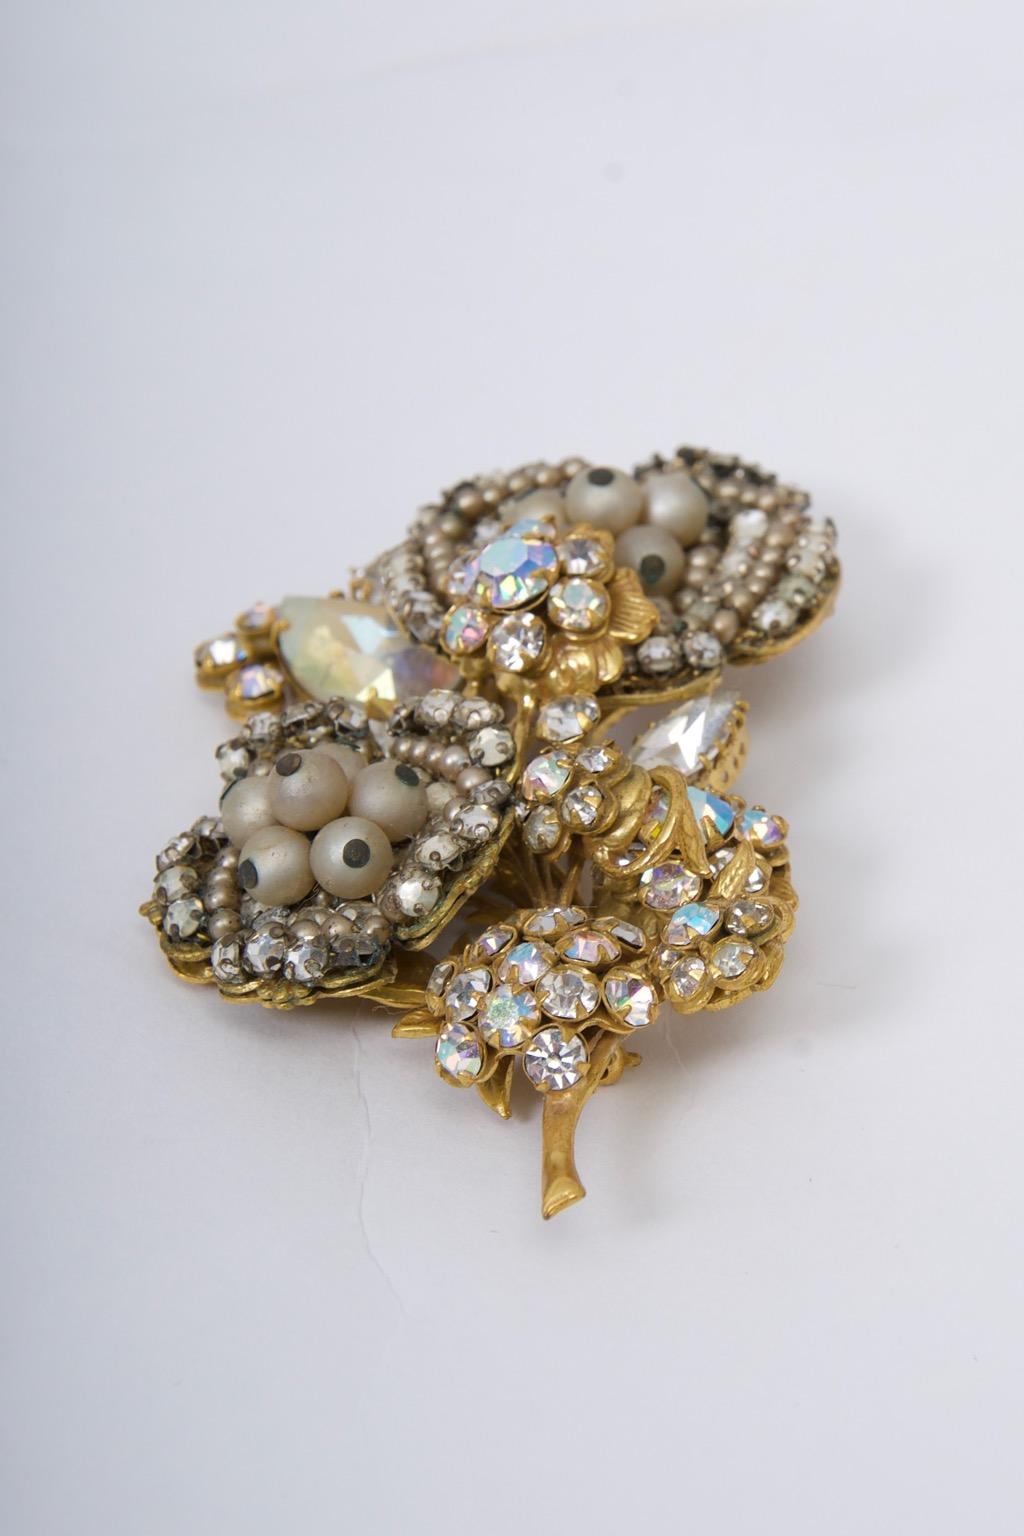 Large brooch by Robert featuring both clear and aurora borealis crystals along with pearls composed in an intricate flower design. Similar to the work of Miriam Haskell, Robert's designs of the 1950s and '60s employed wires to attach the elements to